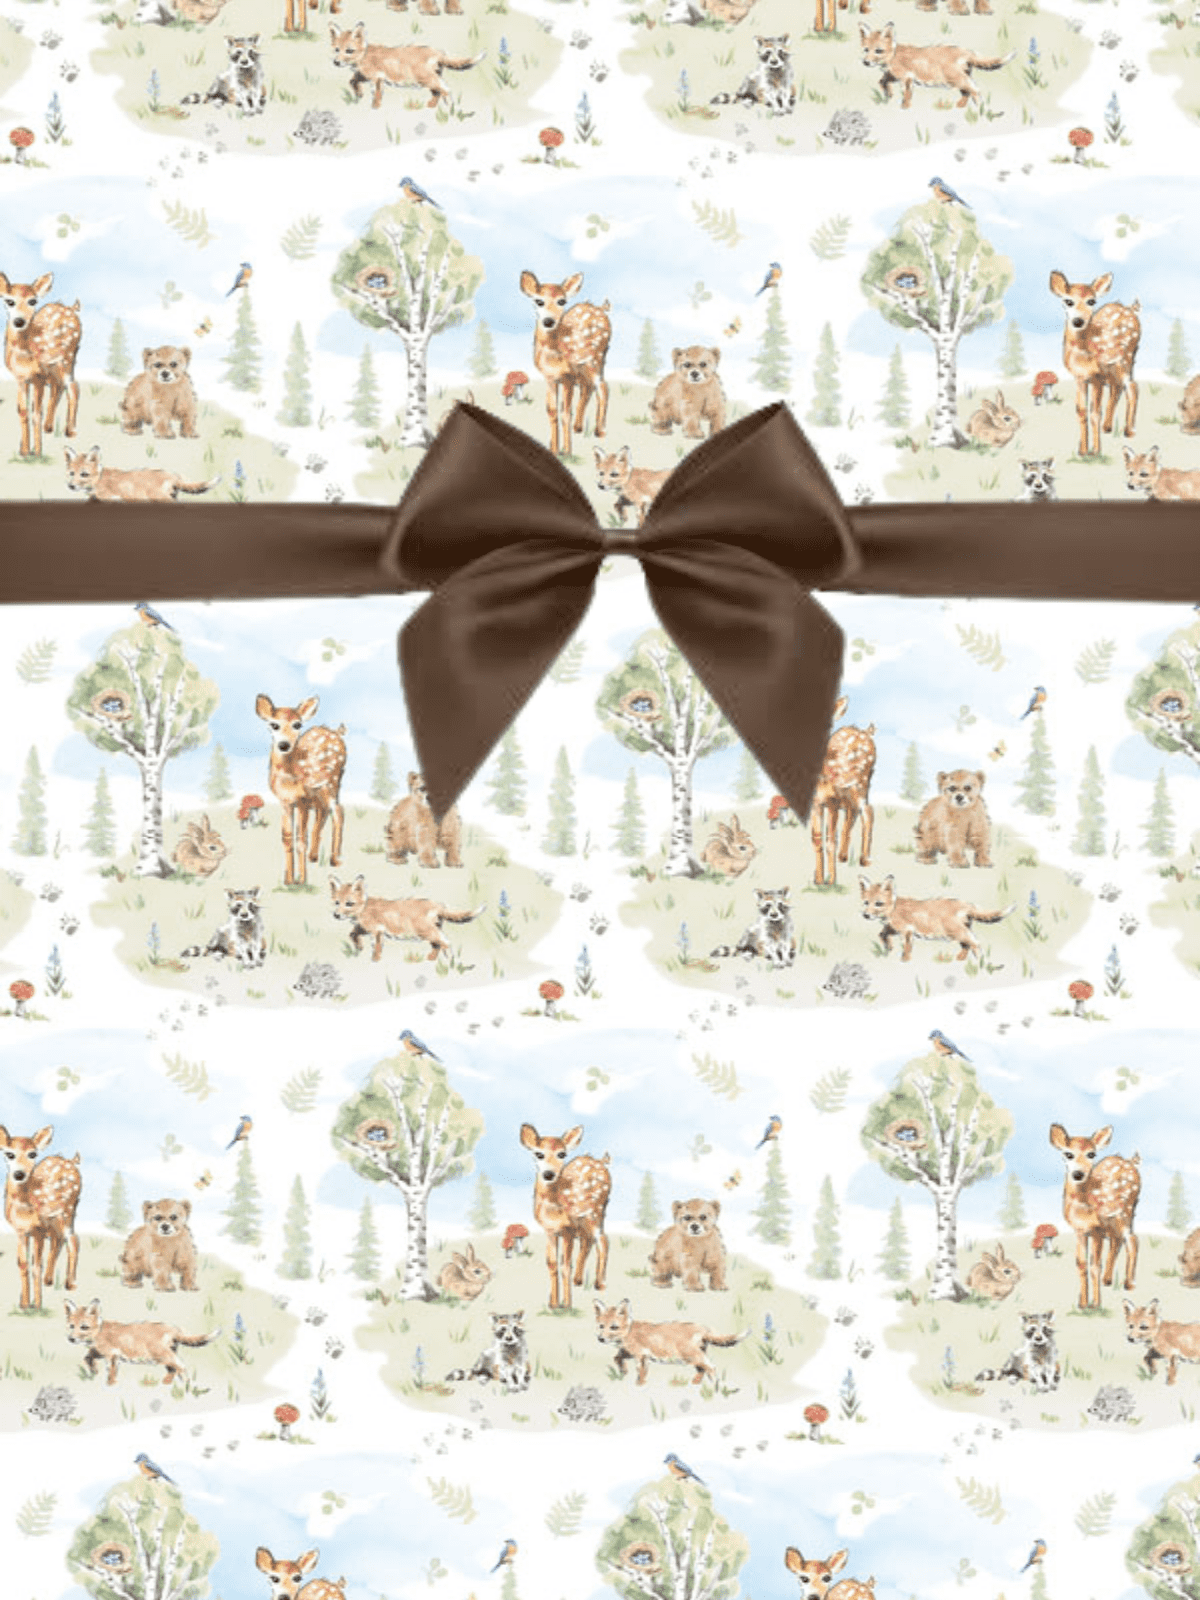 Baby Animals Wrapping Paper for Baby Shower Gift Wrap for Child's Birthday  Animal Print Kid's Present Wrapping Paper Boy or Girl Baby Gift 